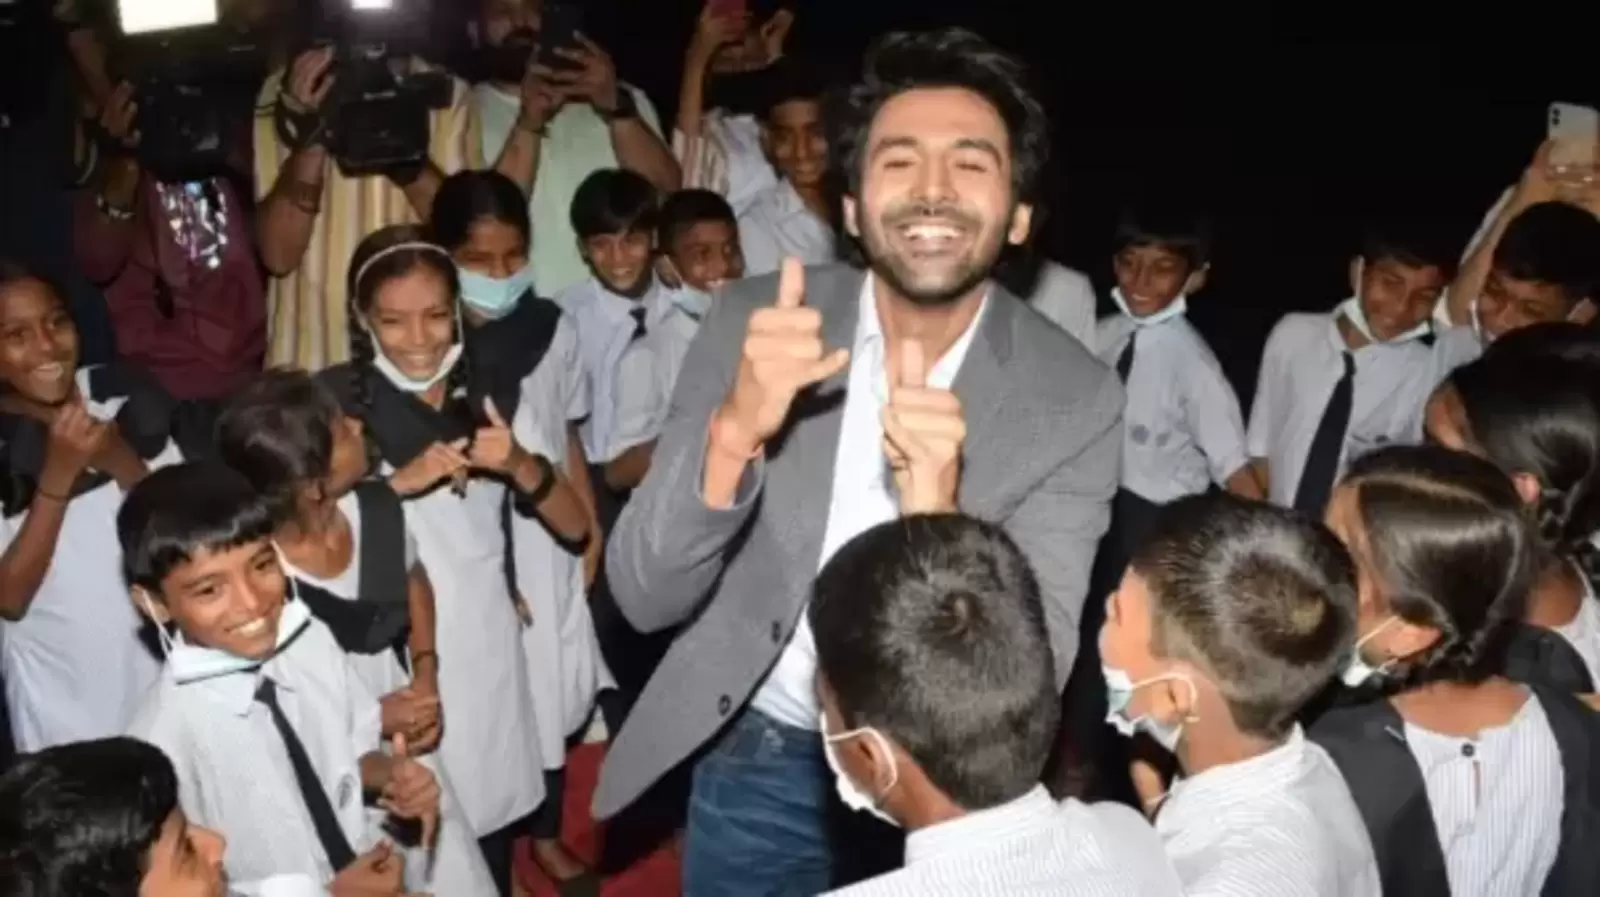 Kartik Aaryan celebrates Bhool Bhulaiyaa 2’s success by dancing to film’s songs with young fans. See pics